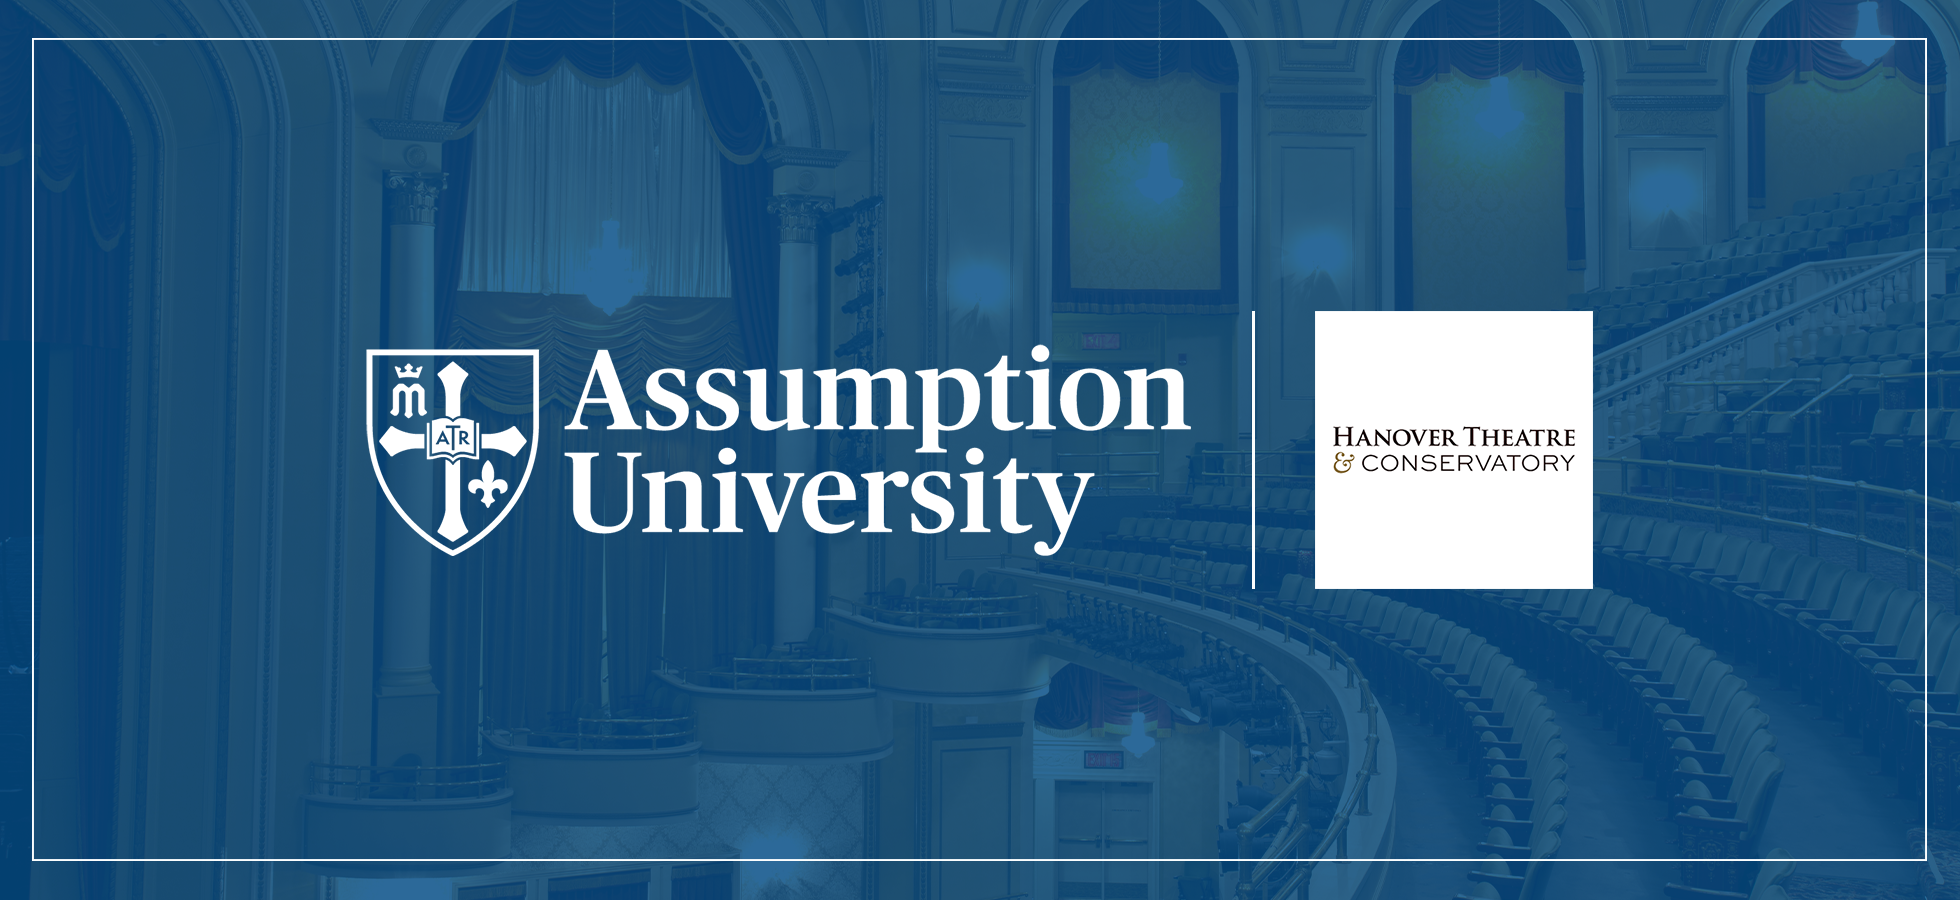 Assumption University has announced the continuation of a partnership with the Worcester Center for Performing Arts (WCPA) that will continue to provide Assumption students with various career and educational opportunities in the arts at the Hanover Theatre & Conservatory. 